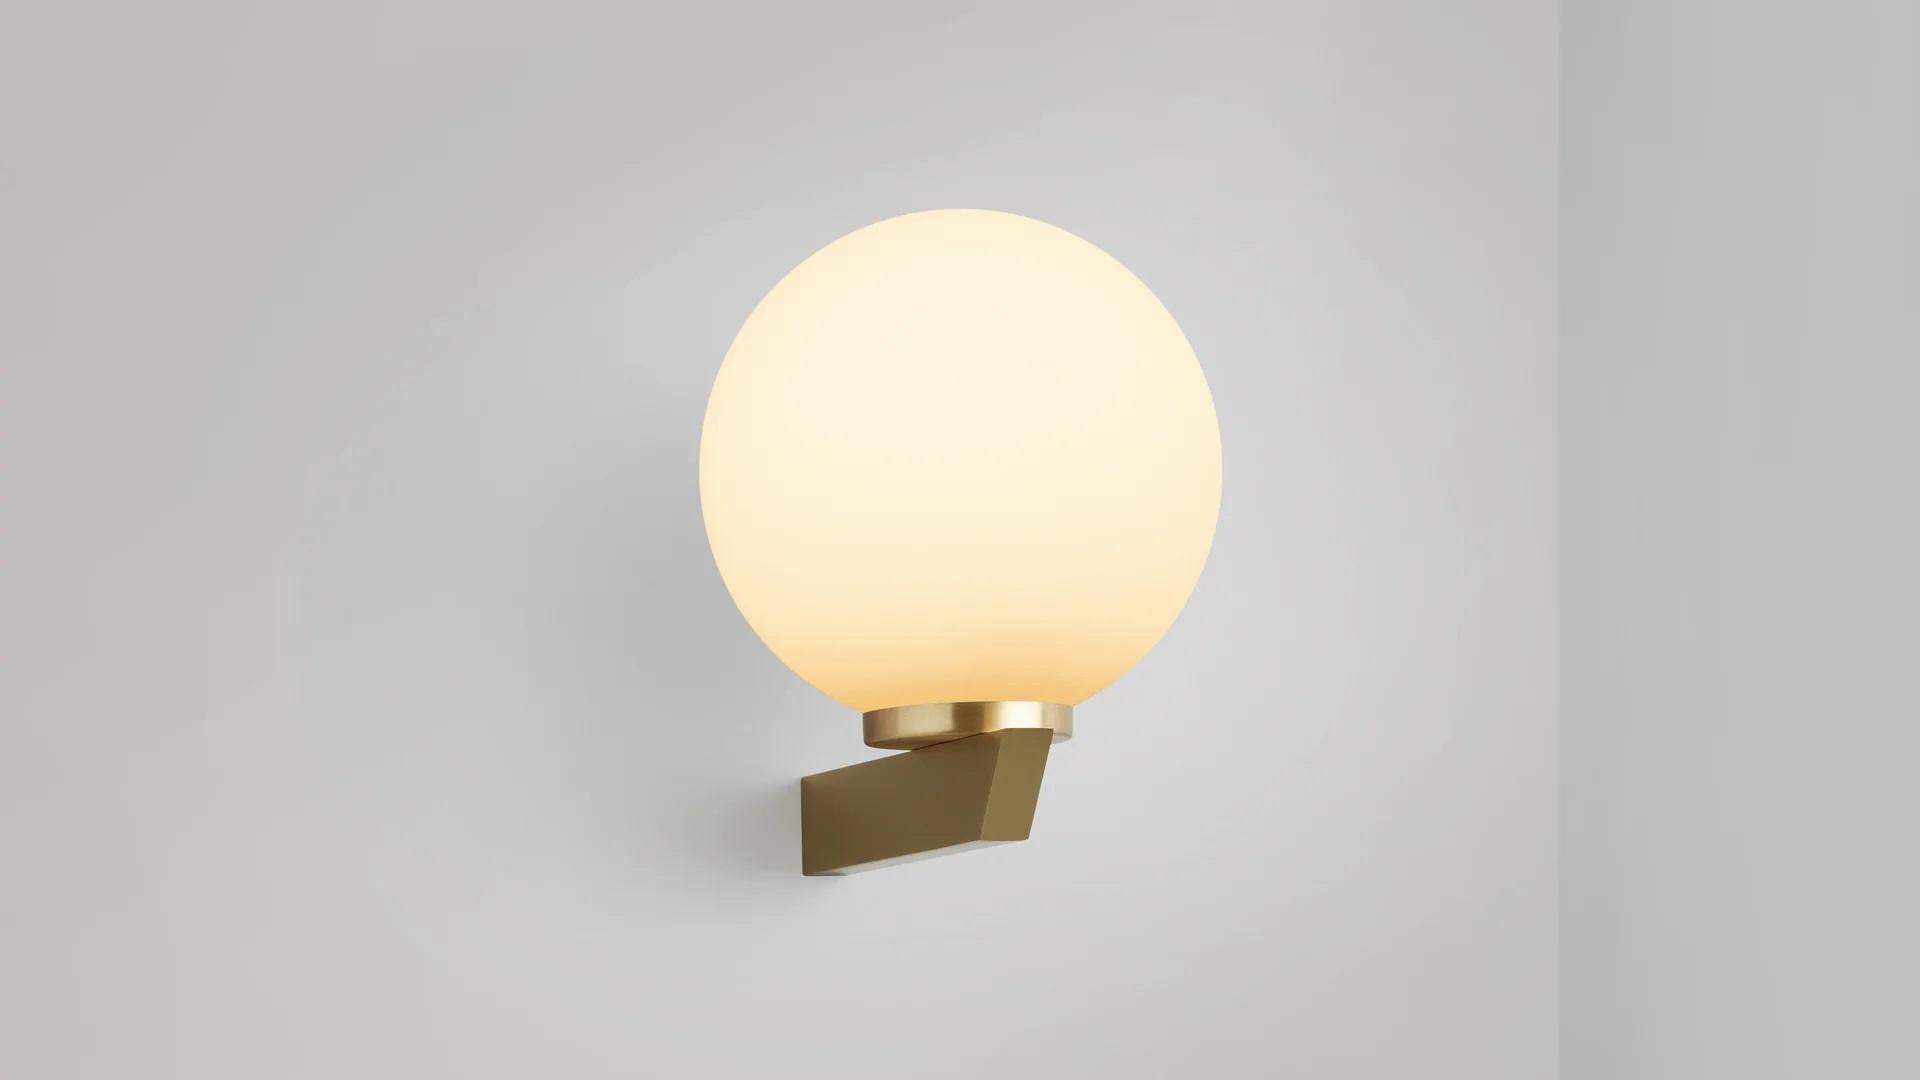 Gaia wall lamp by CTO Lighting
Materials: Satin brass with matt opal glass.
Dimensions: D 21.4 x W 15 x H 19 cm
Available in bronze or satin brass and in hand shaped smoke glass, matte opal glass, shiny opal glass, or tinted glass. 

An elegant